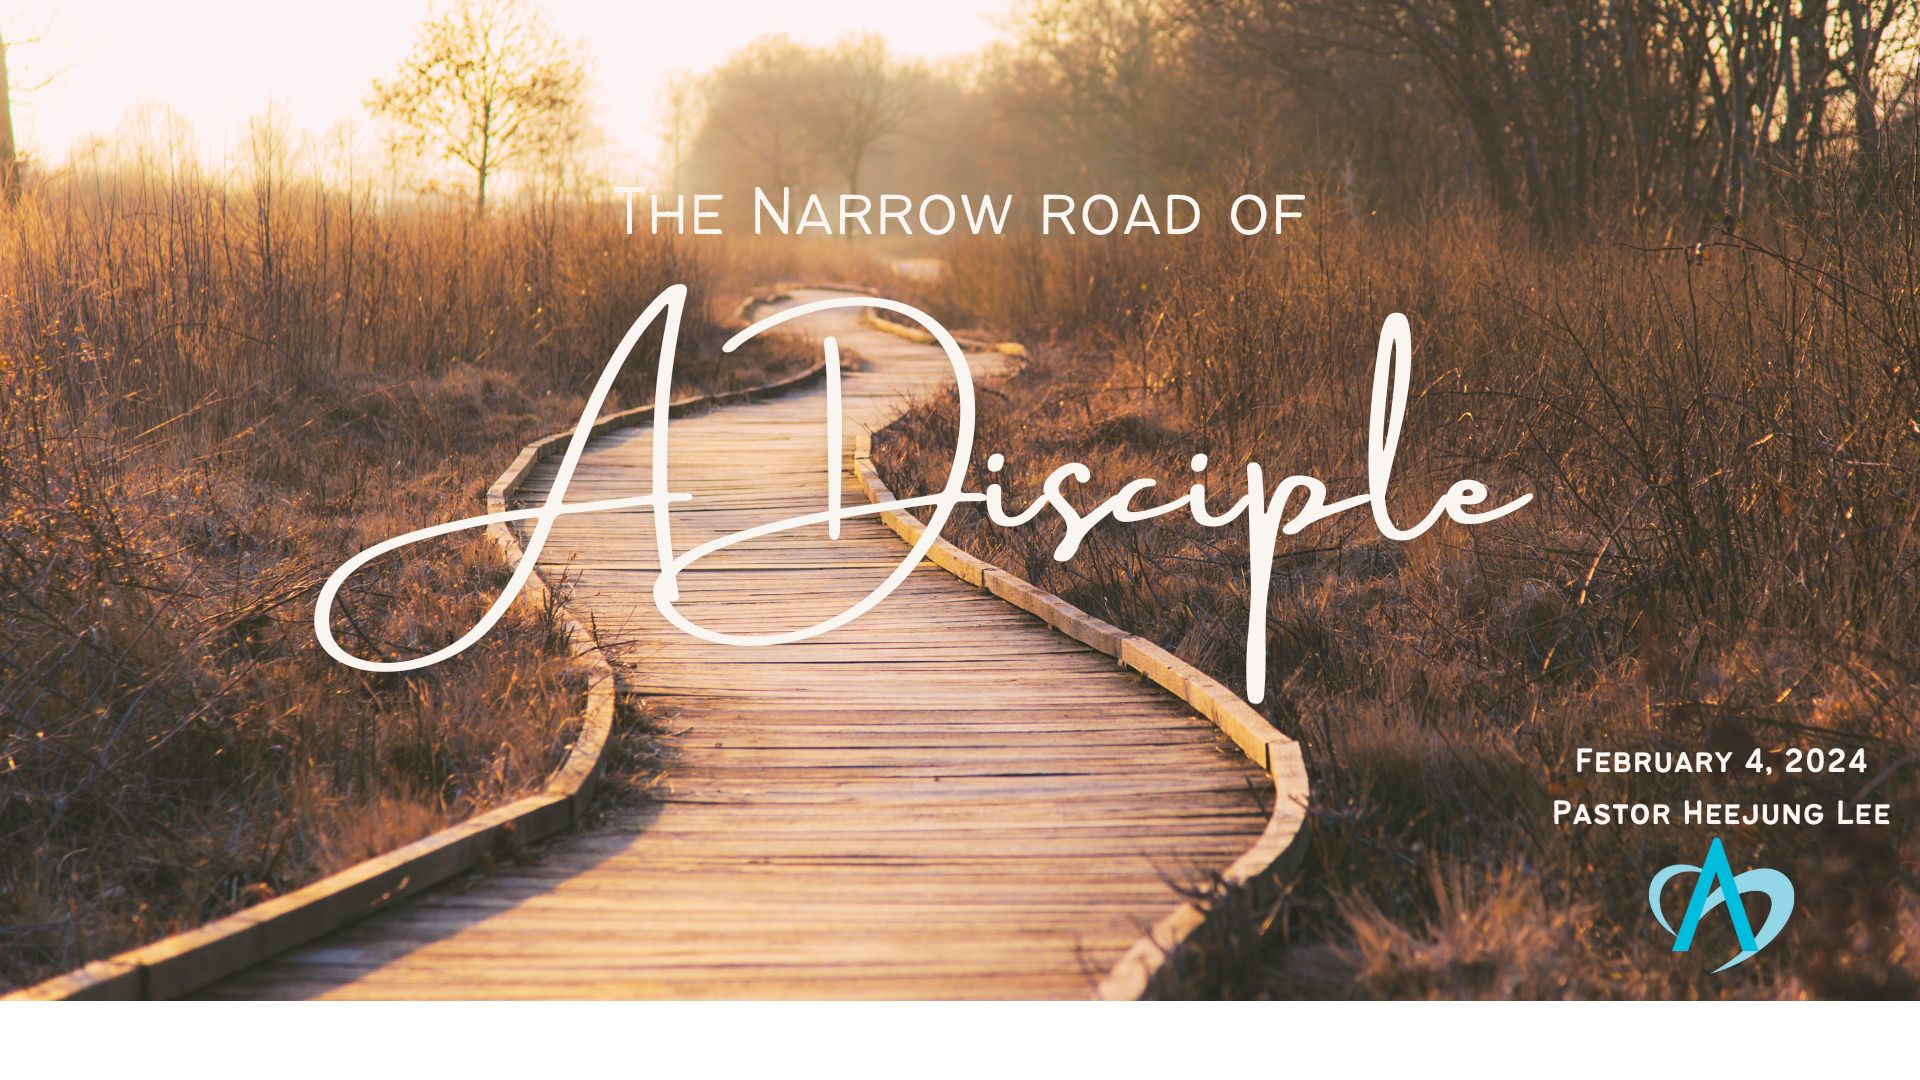 The Narrow Road of a Disciple by Pastor Heejung Lee